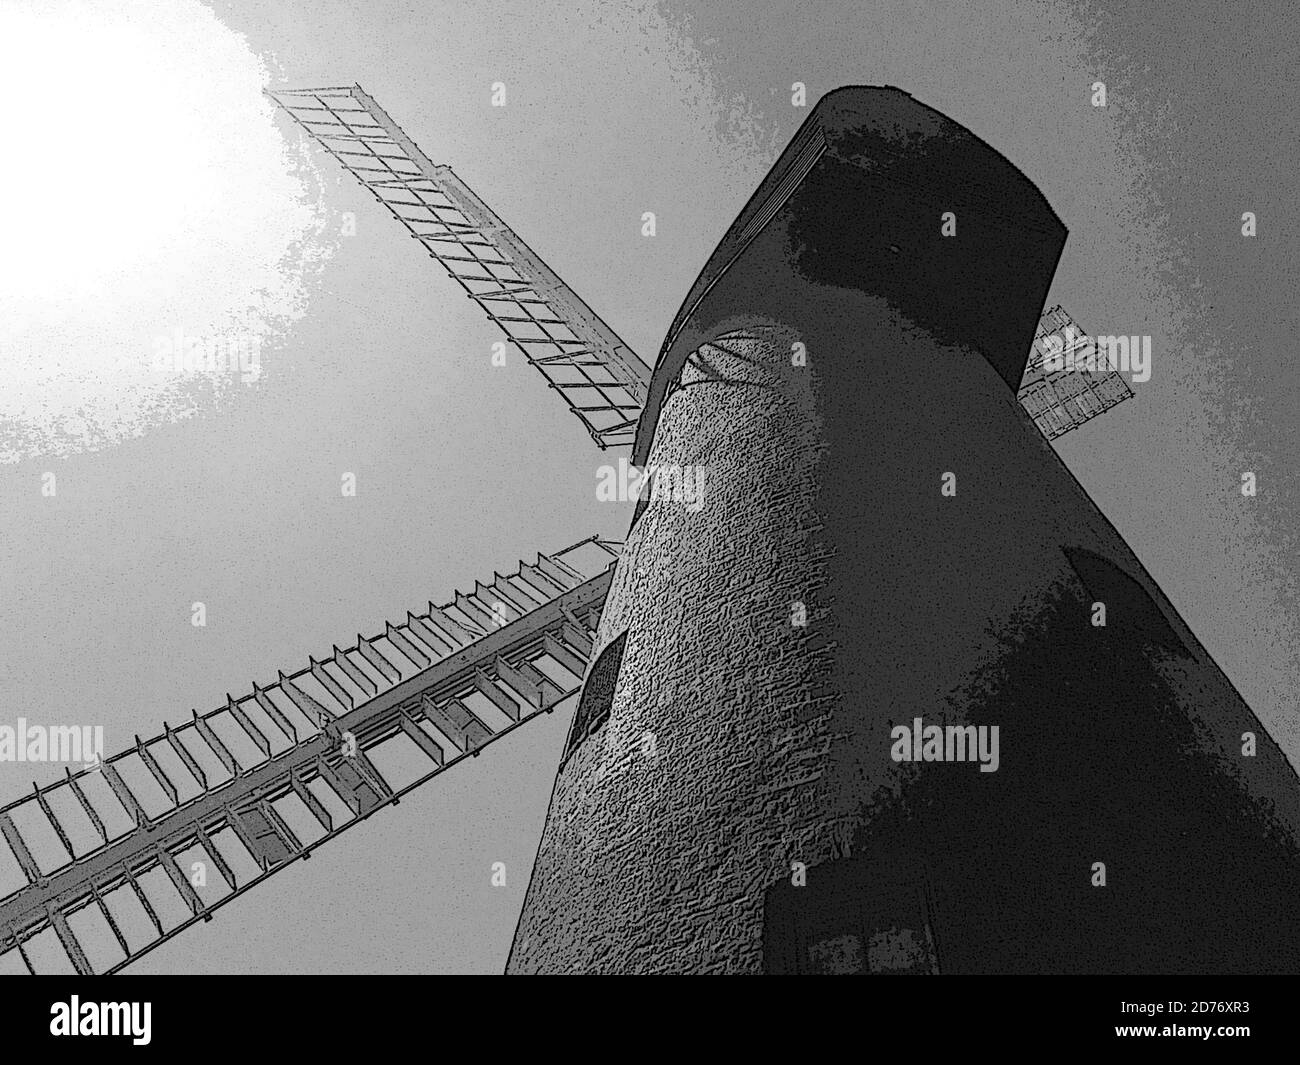 Brixton Windmill (built 1816)  also known as Ashby's Mill, London Borough of Lambeth, close up of the brick tower and sails, digital illustration art Stock Photo